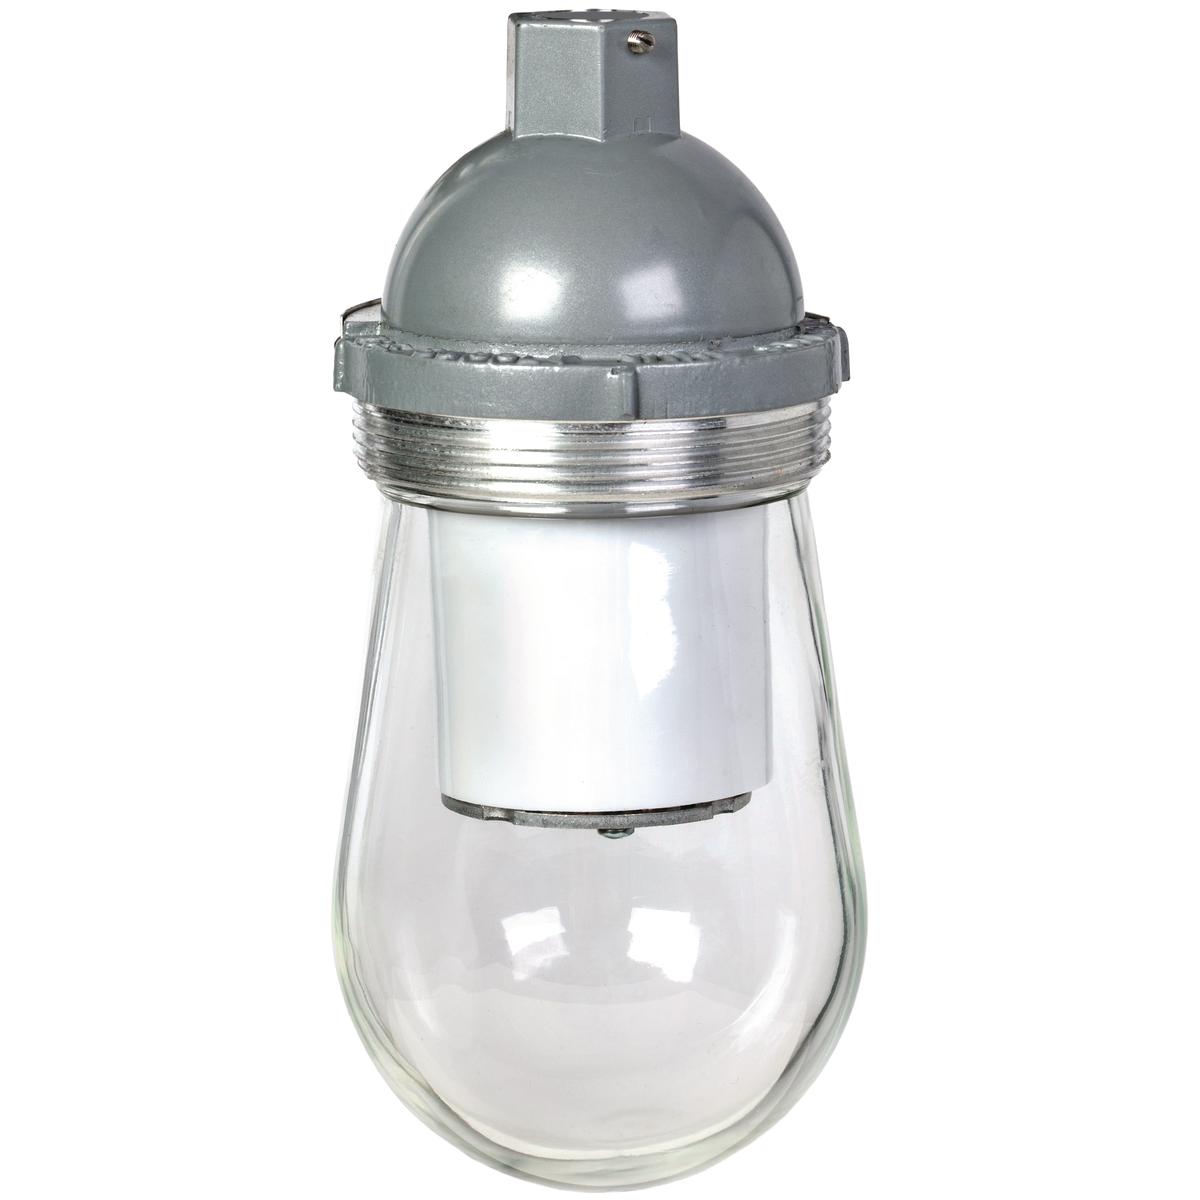 Hubbell DVL1330A1G The DVL Series is a Dust Tight/ Utility fixture using energy efficient LED's. This fixture is made with a cast copper-free aluminum housing and mount that is  suitable for harsh and hazardous environments. With the design of this fixtures internal heat si